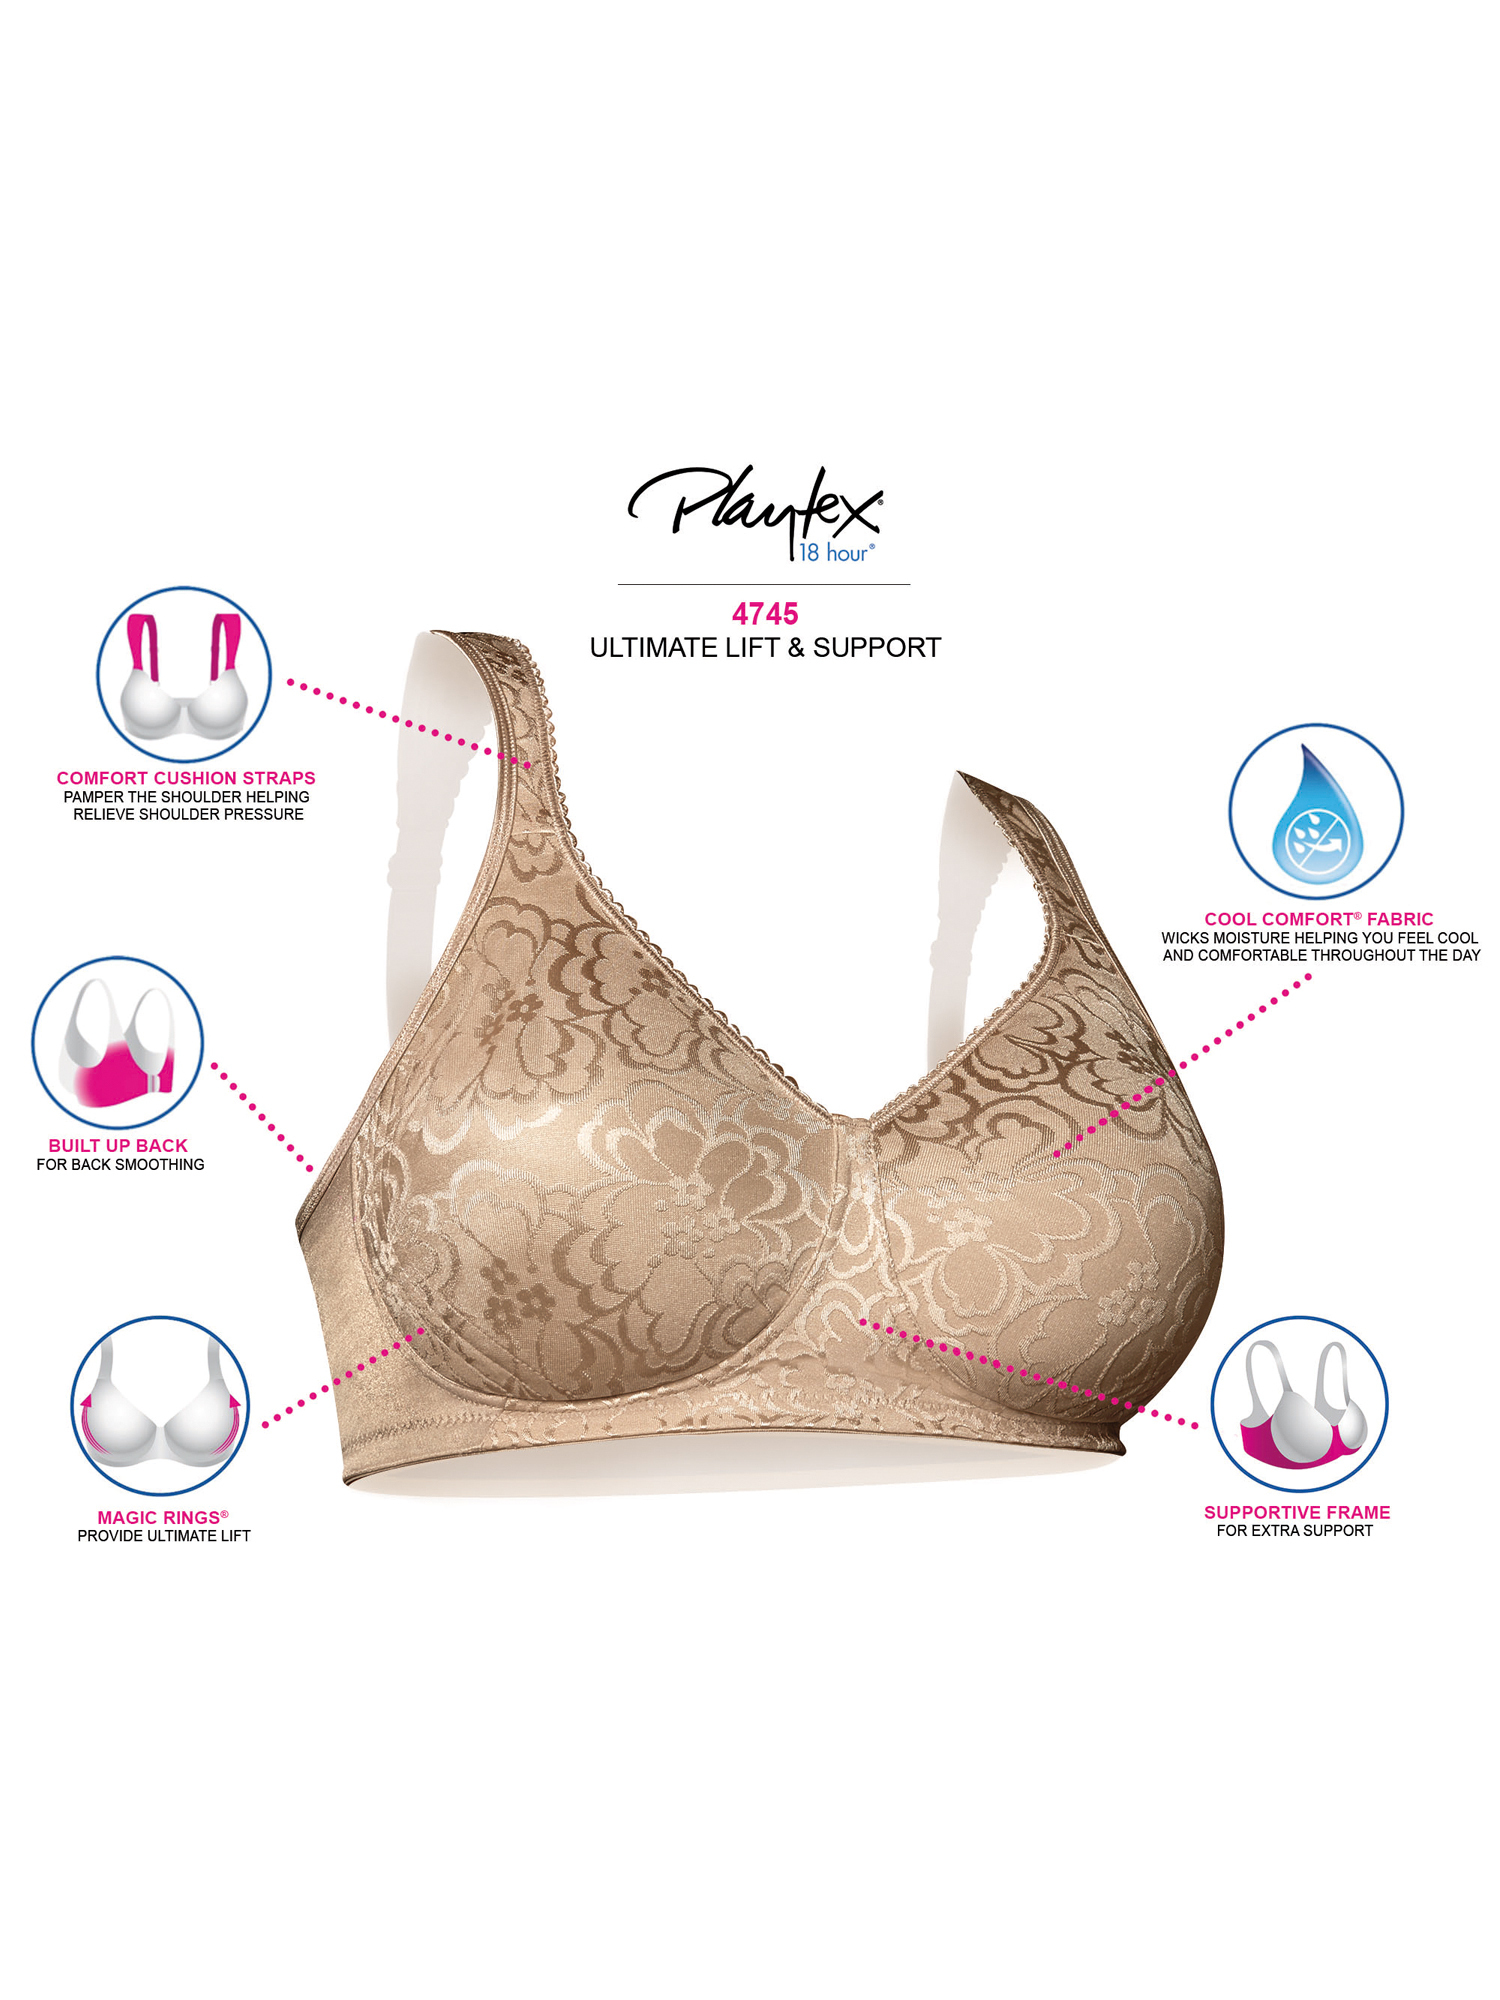 Playtex Nude 18 Hour Ultimate Lift and Support Seamless Bra US 40g UK 40f  for sale online